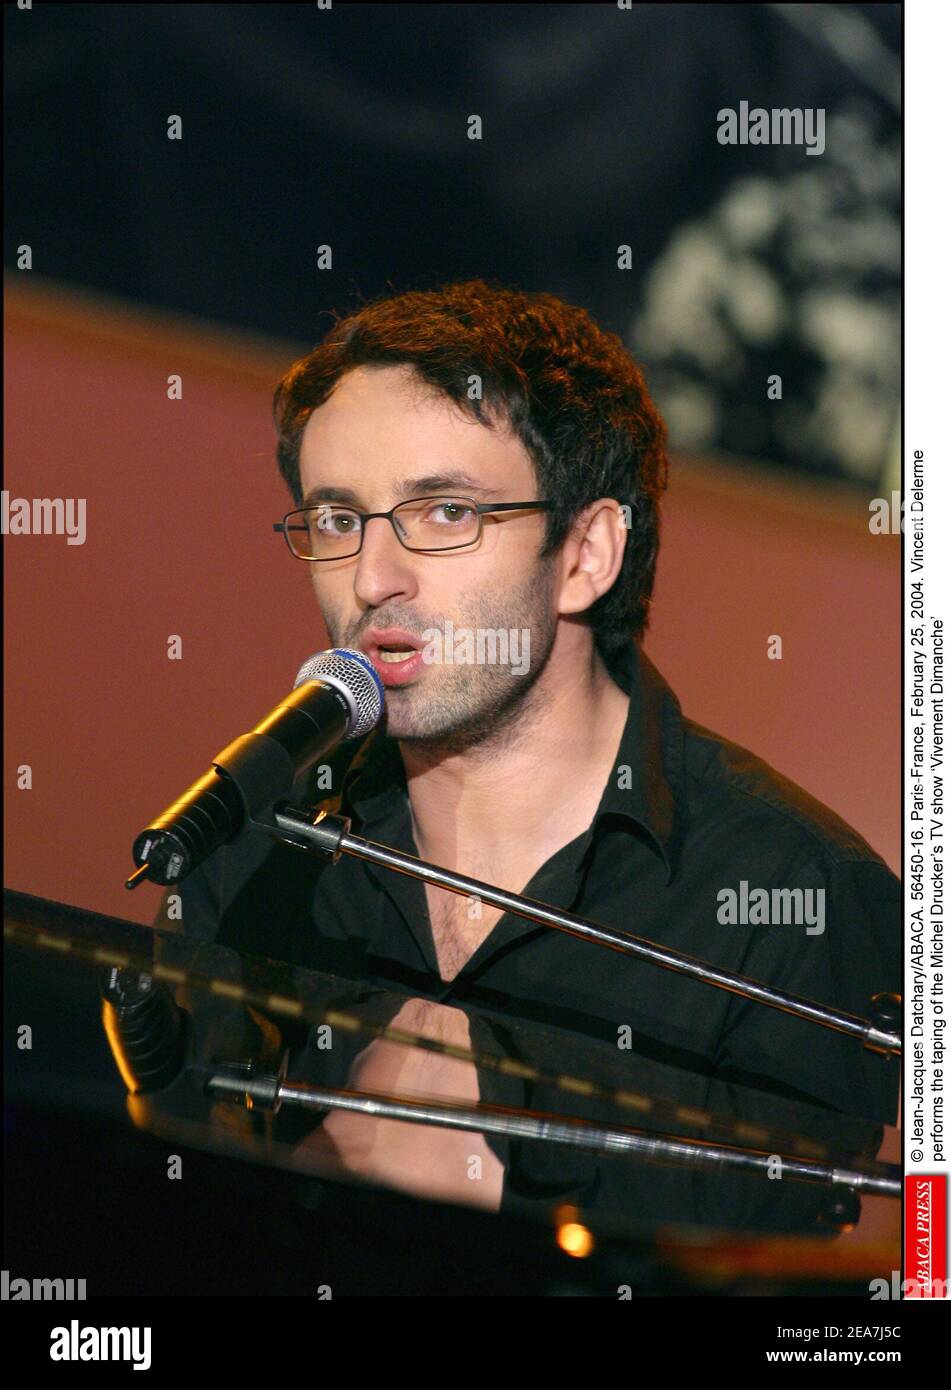 © Jean-Jacques Datchary/ABACA. 56450-16. Paris-France, February 25, 2004. Vincent Delerm performs the taping of the Michel Drucker's TV show 'Vivement Dimanche' Stock Photo